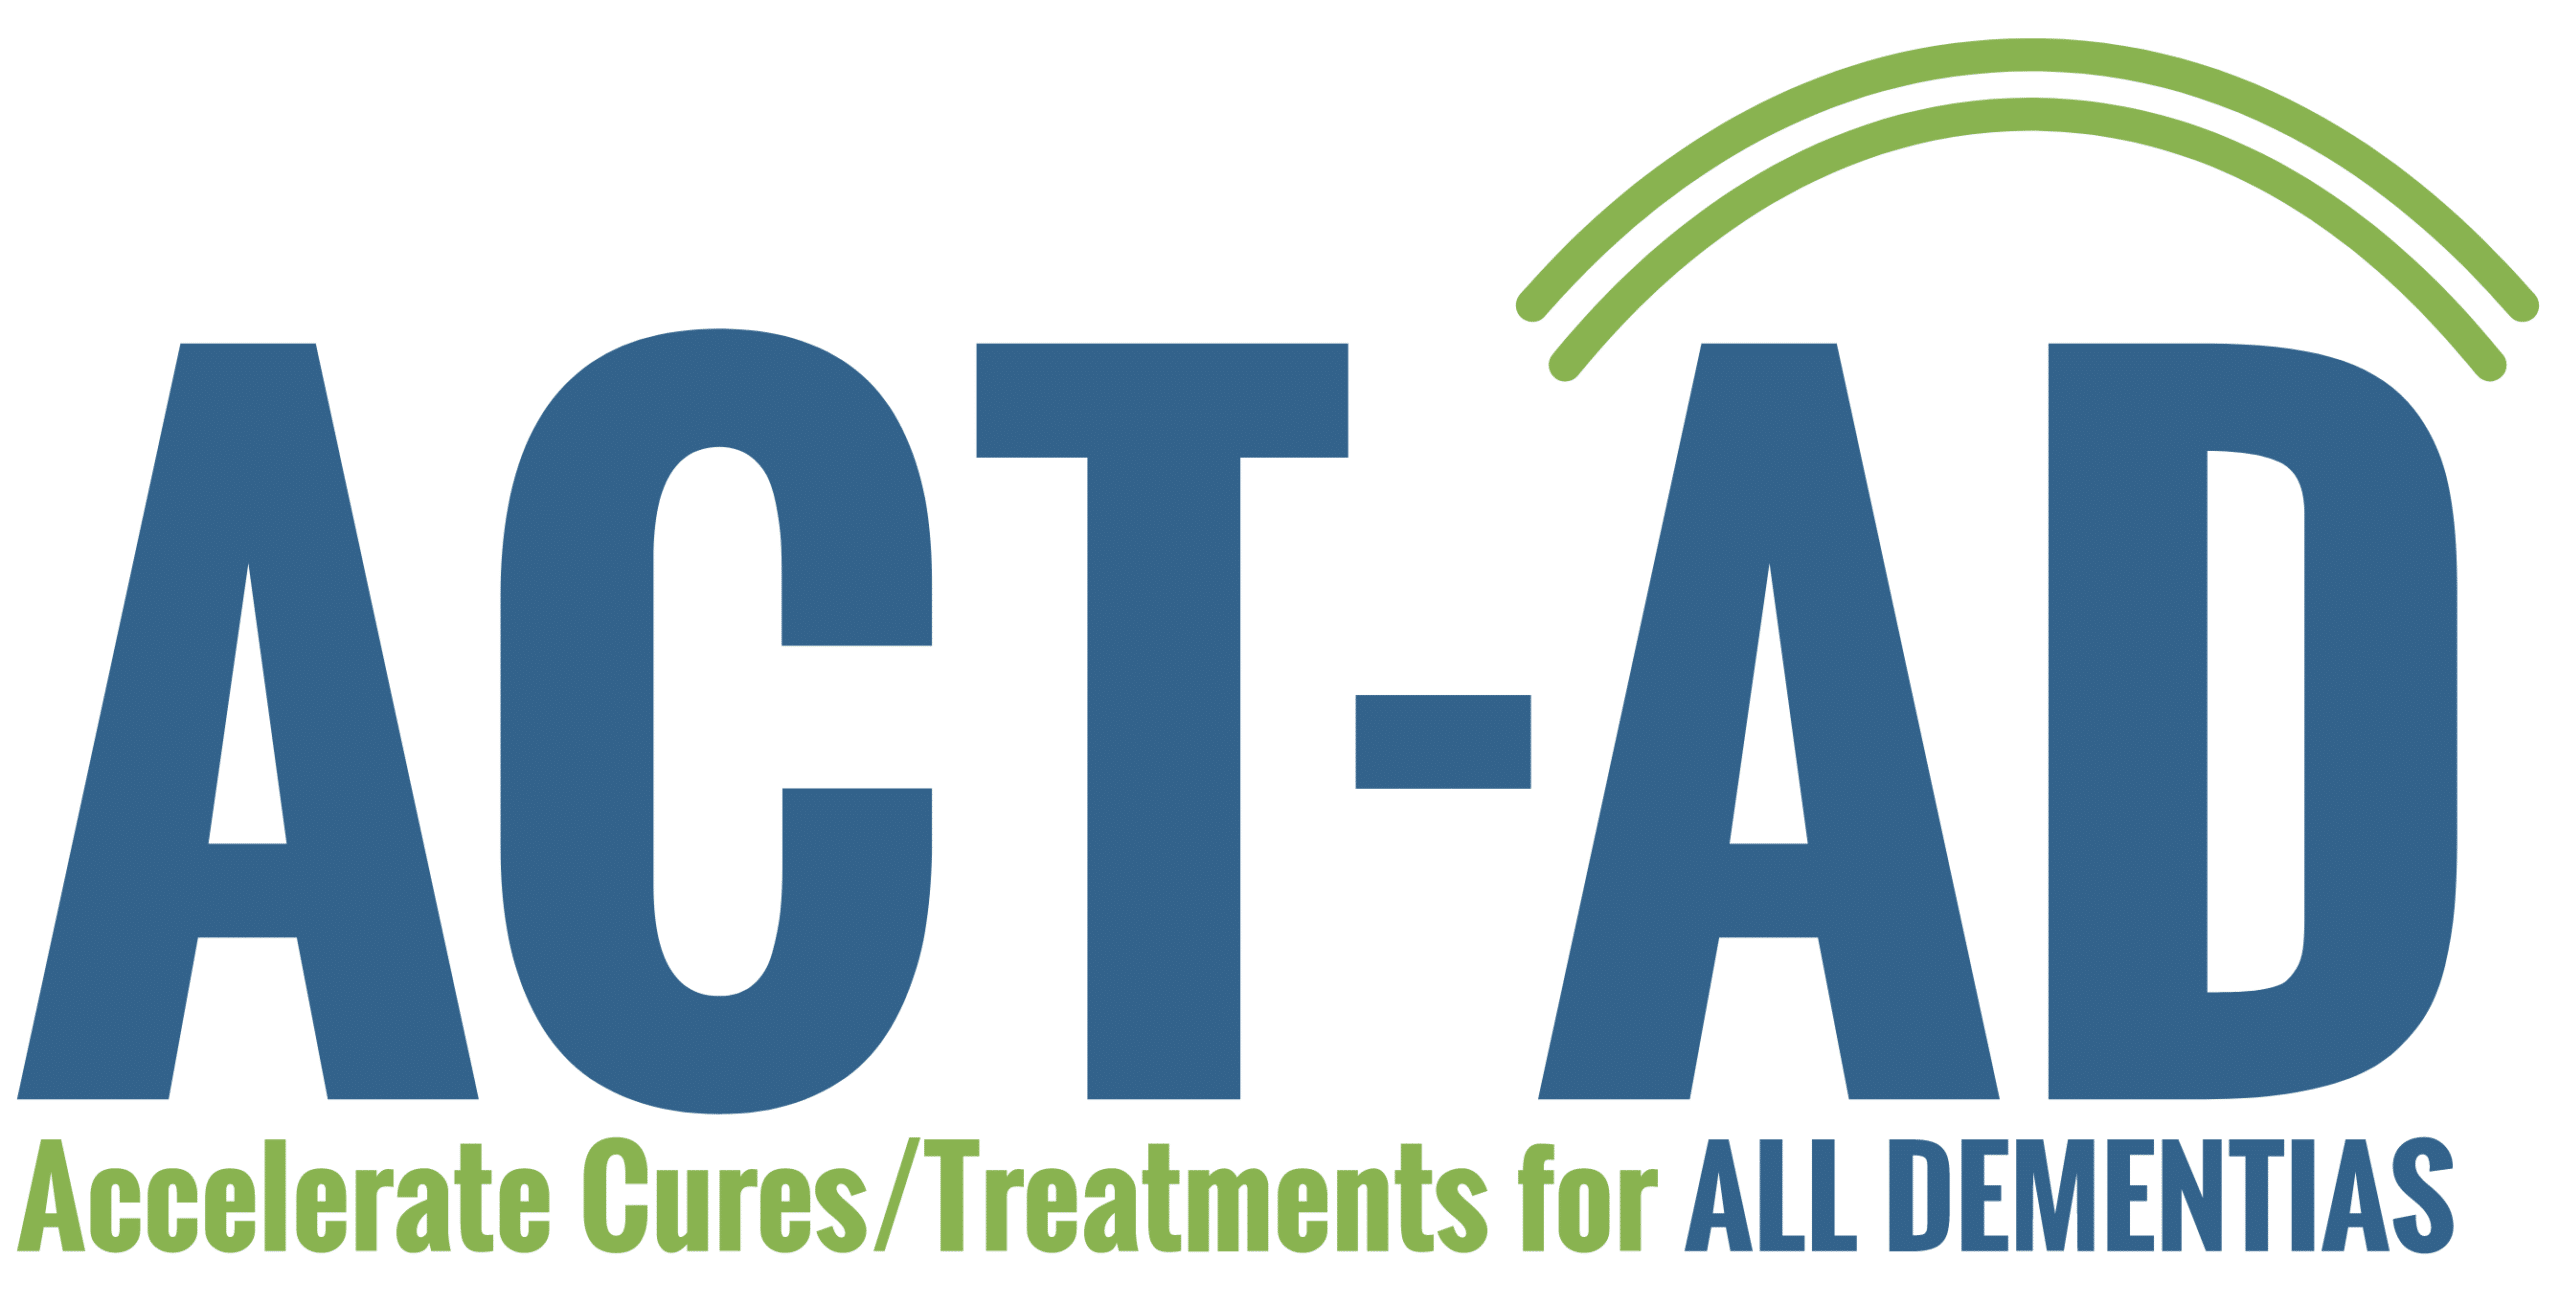 Accelerate Cures Treatments for All Dementias logo